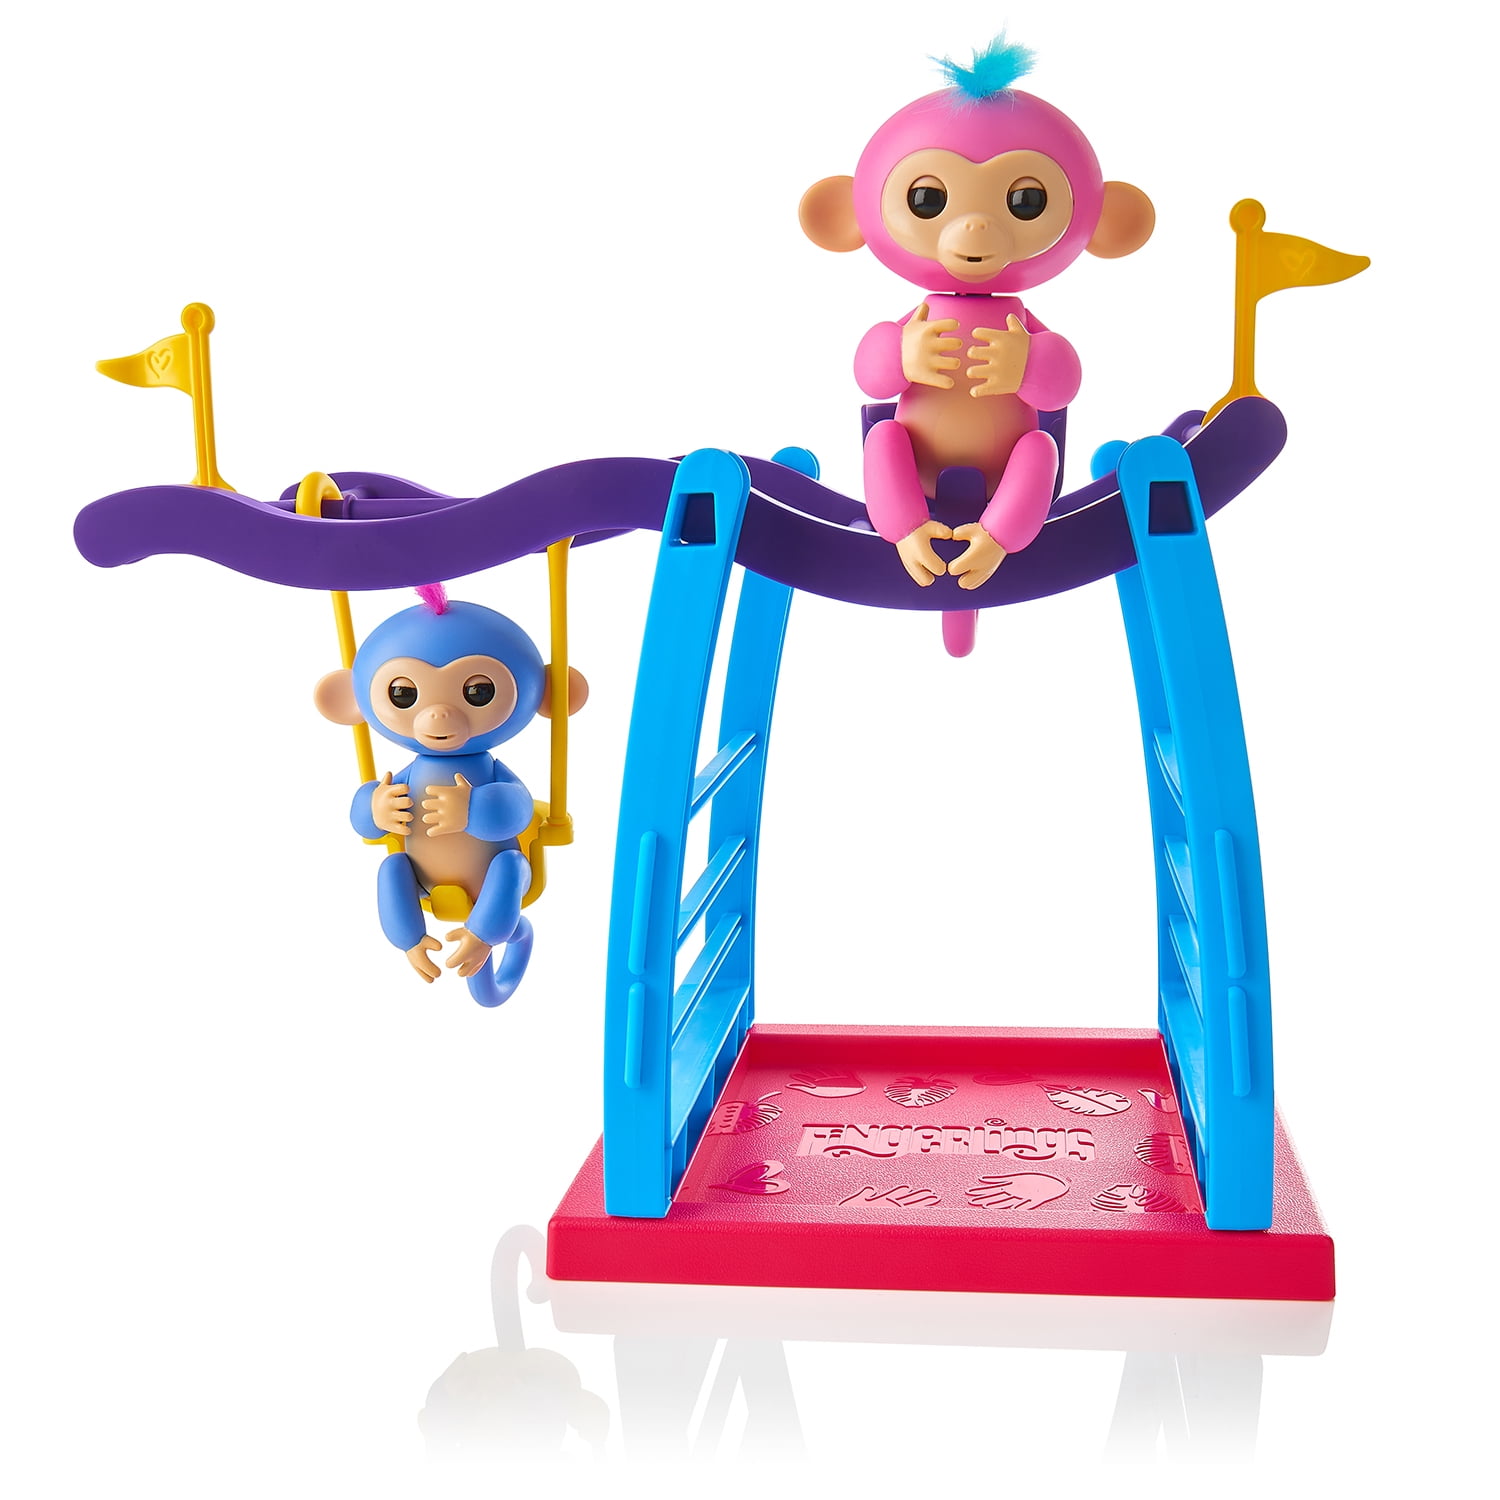 Fingerlings Playset with 2 Fingerlings Unicorns Perfect Place For Fingerlings 